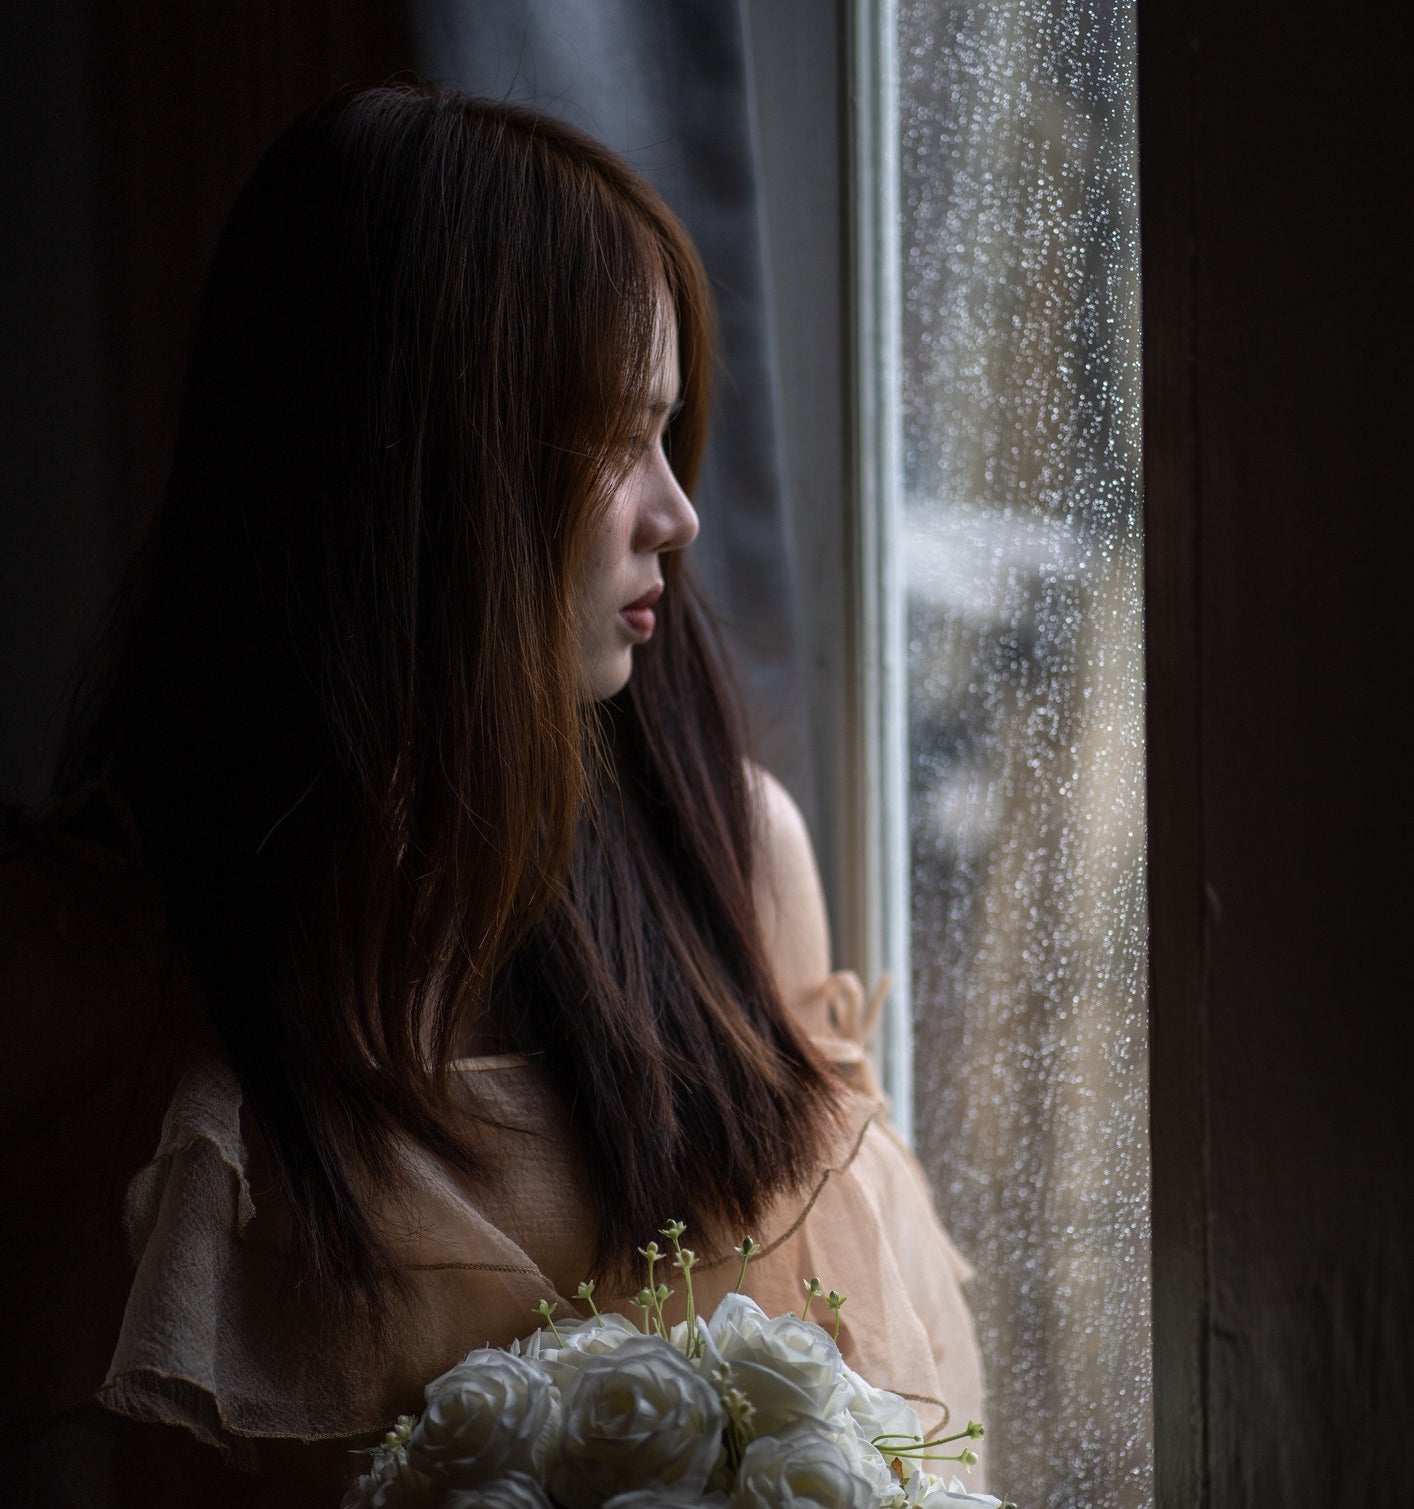 A woman holding roses stares out a window as it&#x27;s raining